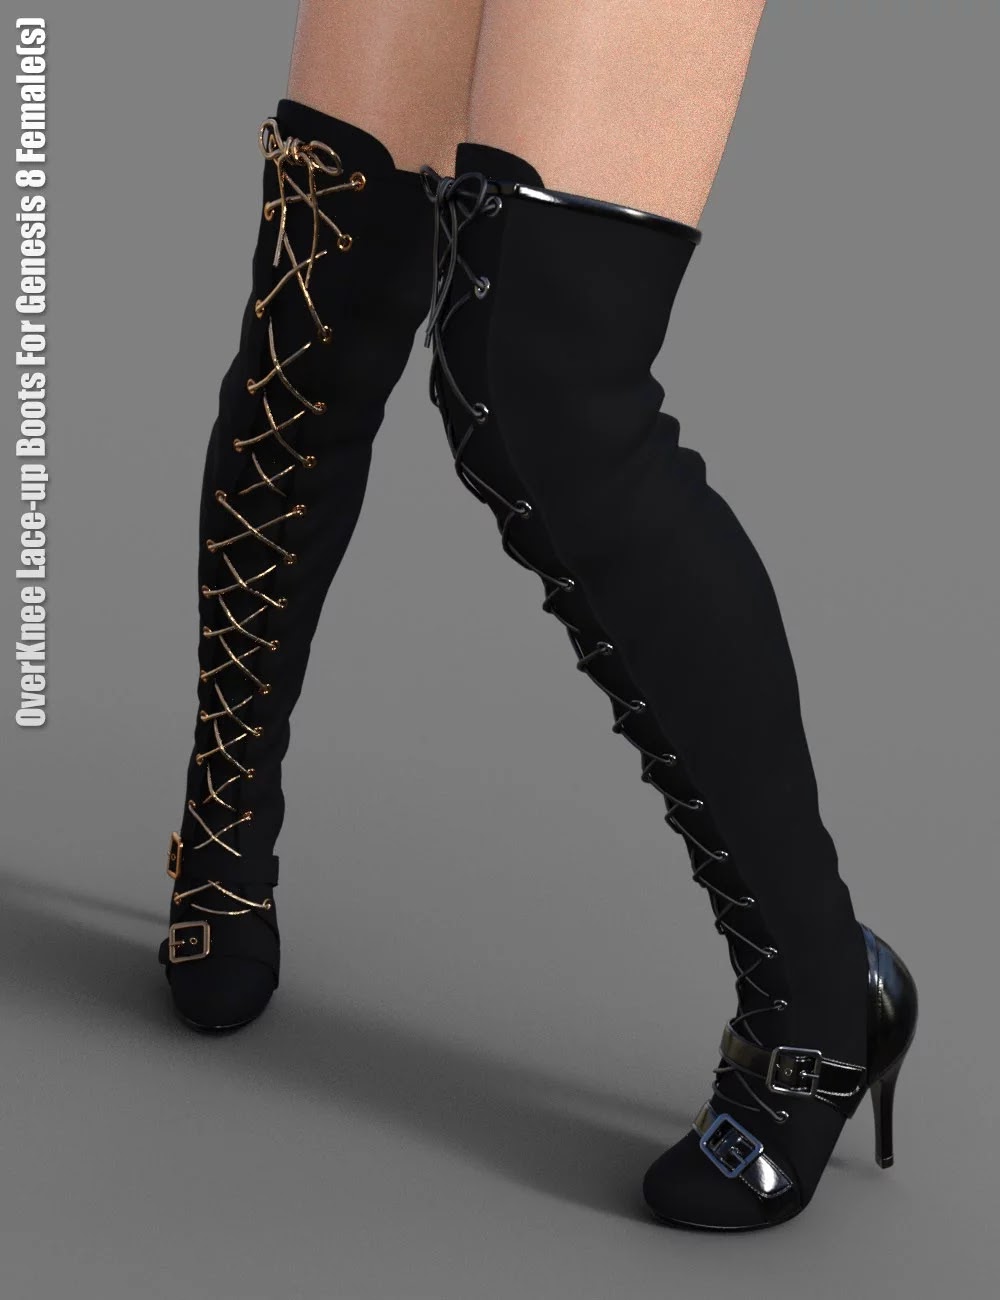 OverKnee Lace-Up Boots for Genesis 8 Female(s)_DAZ3D下载站